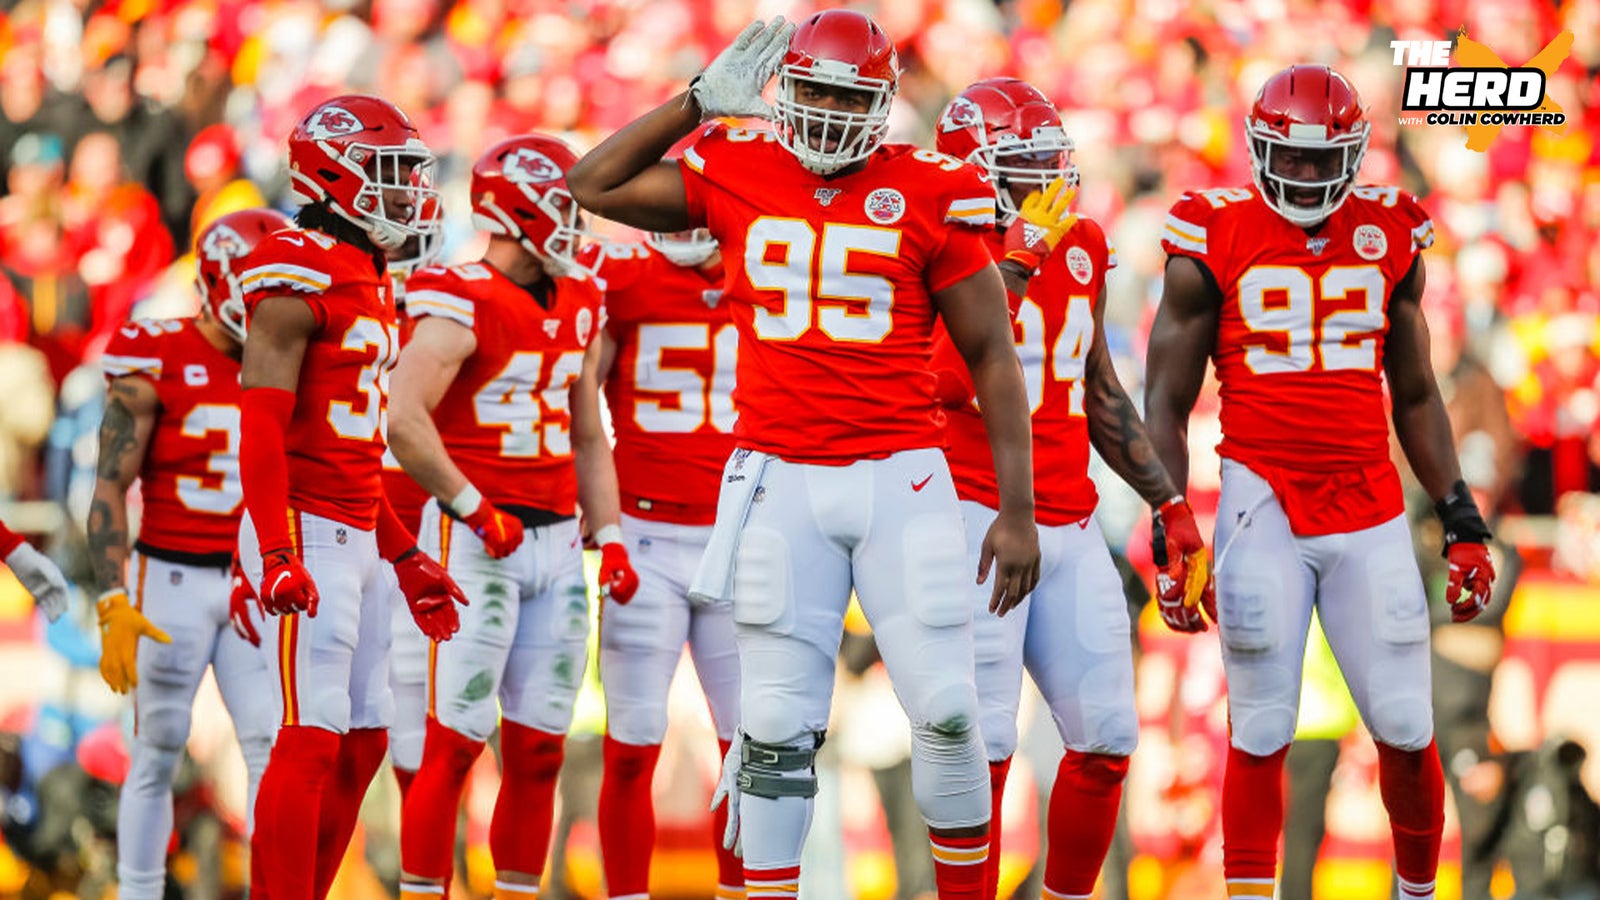 Do the Chiefs have a more dominant defense than the 49ers?